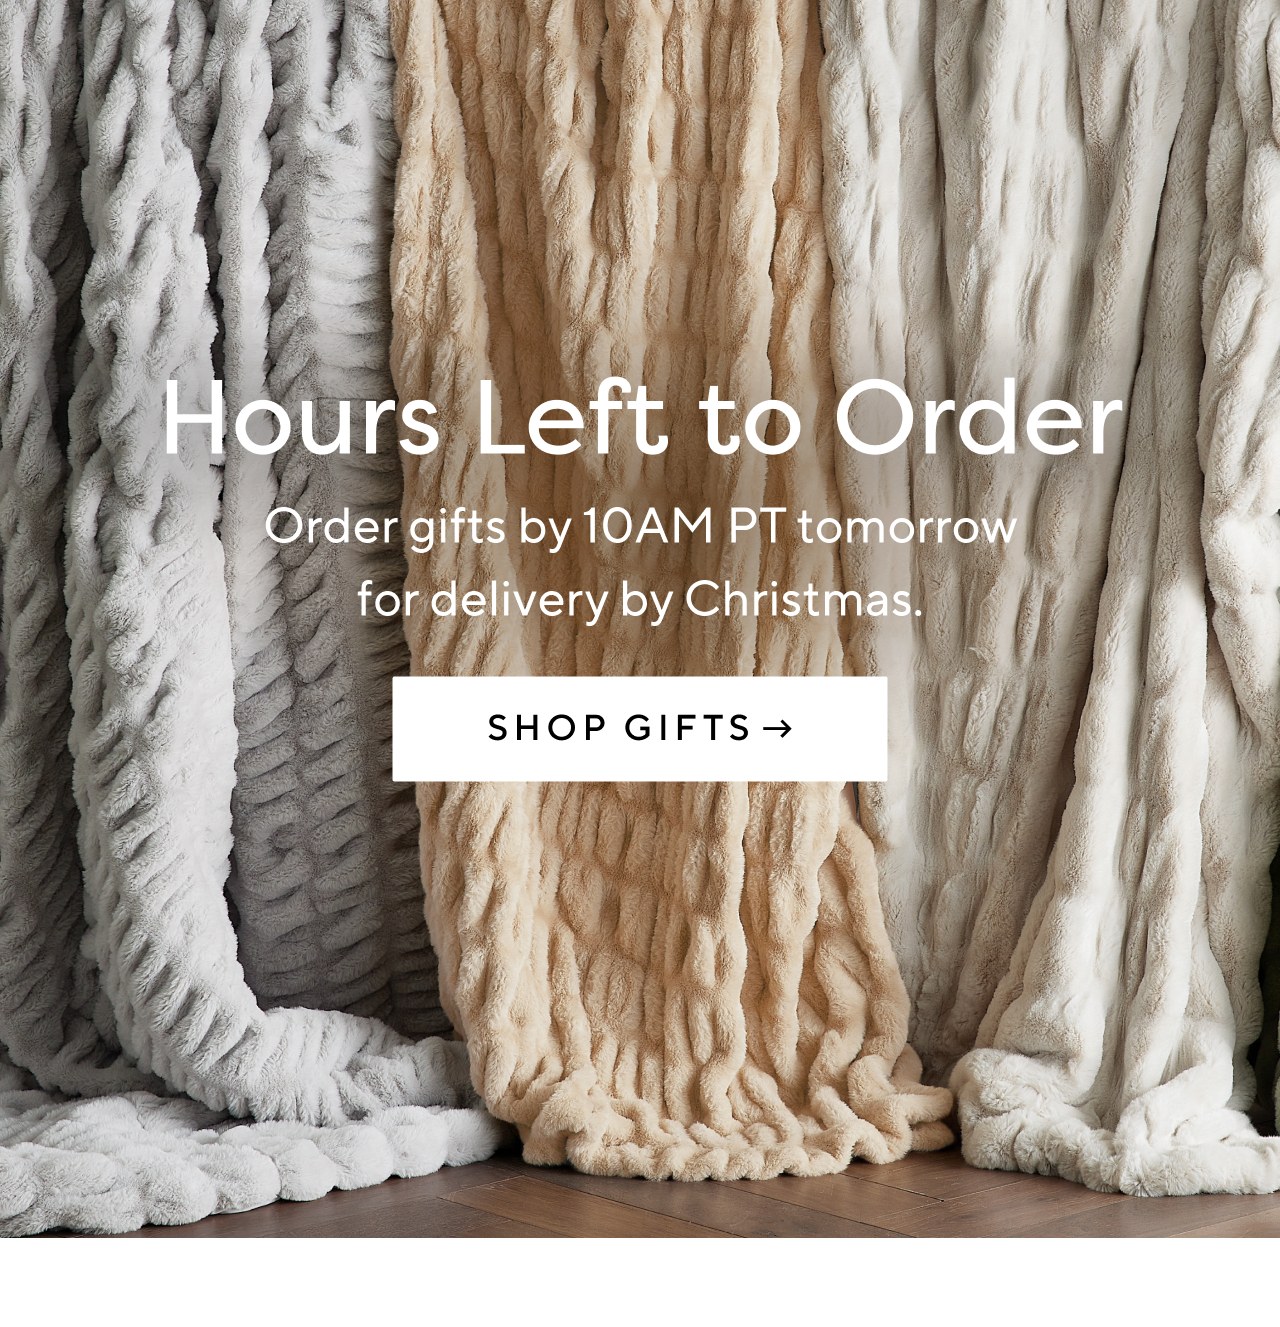 HOURS LEFT TO ORDER. SHOP GIFTS